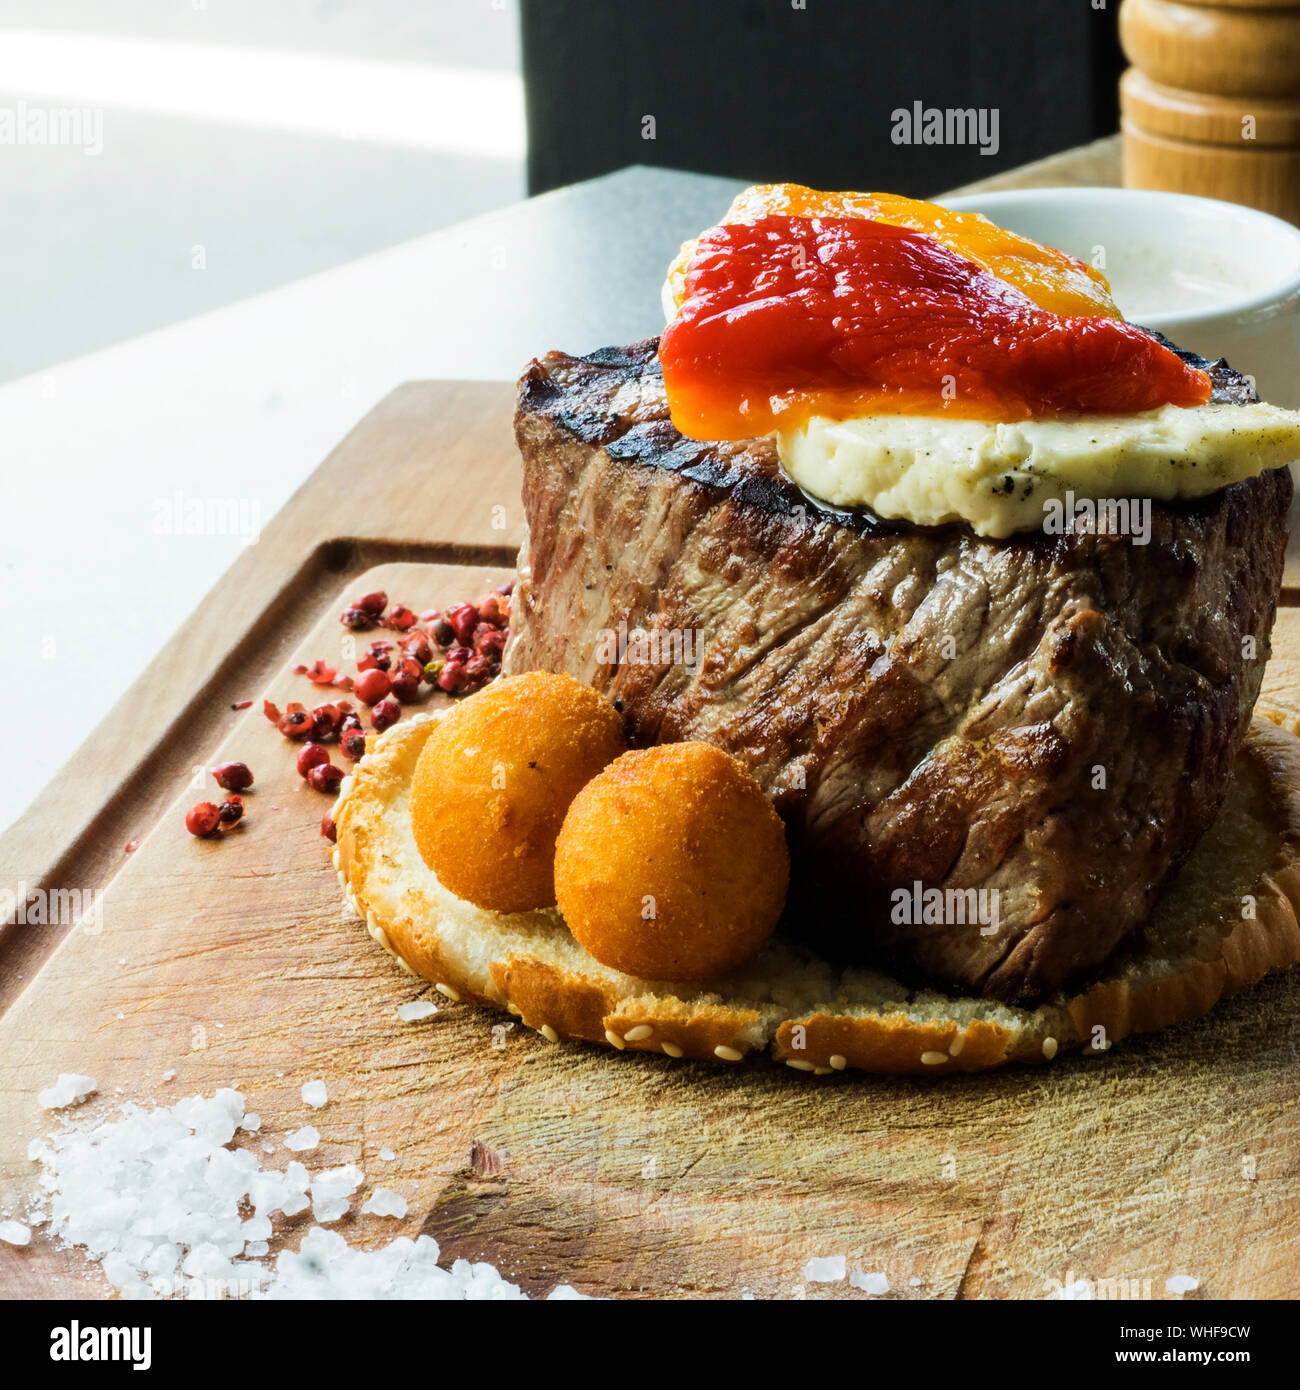 Close-up Of Fresh Filet Mignon Steak With Brynza And Mushroom Sauce On Wooden Cutting Board Stock Photo